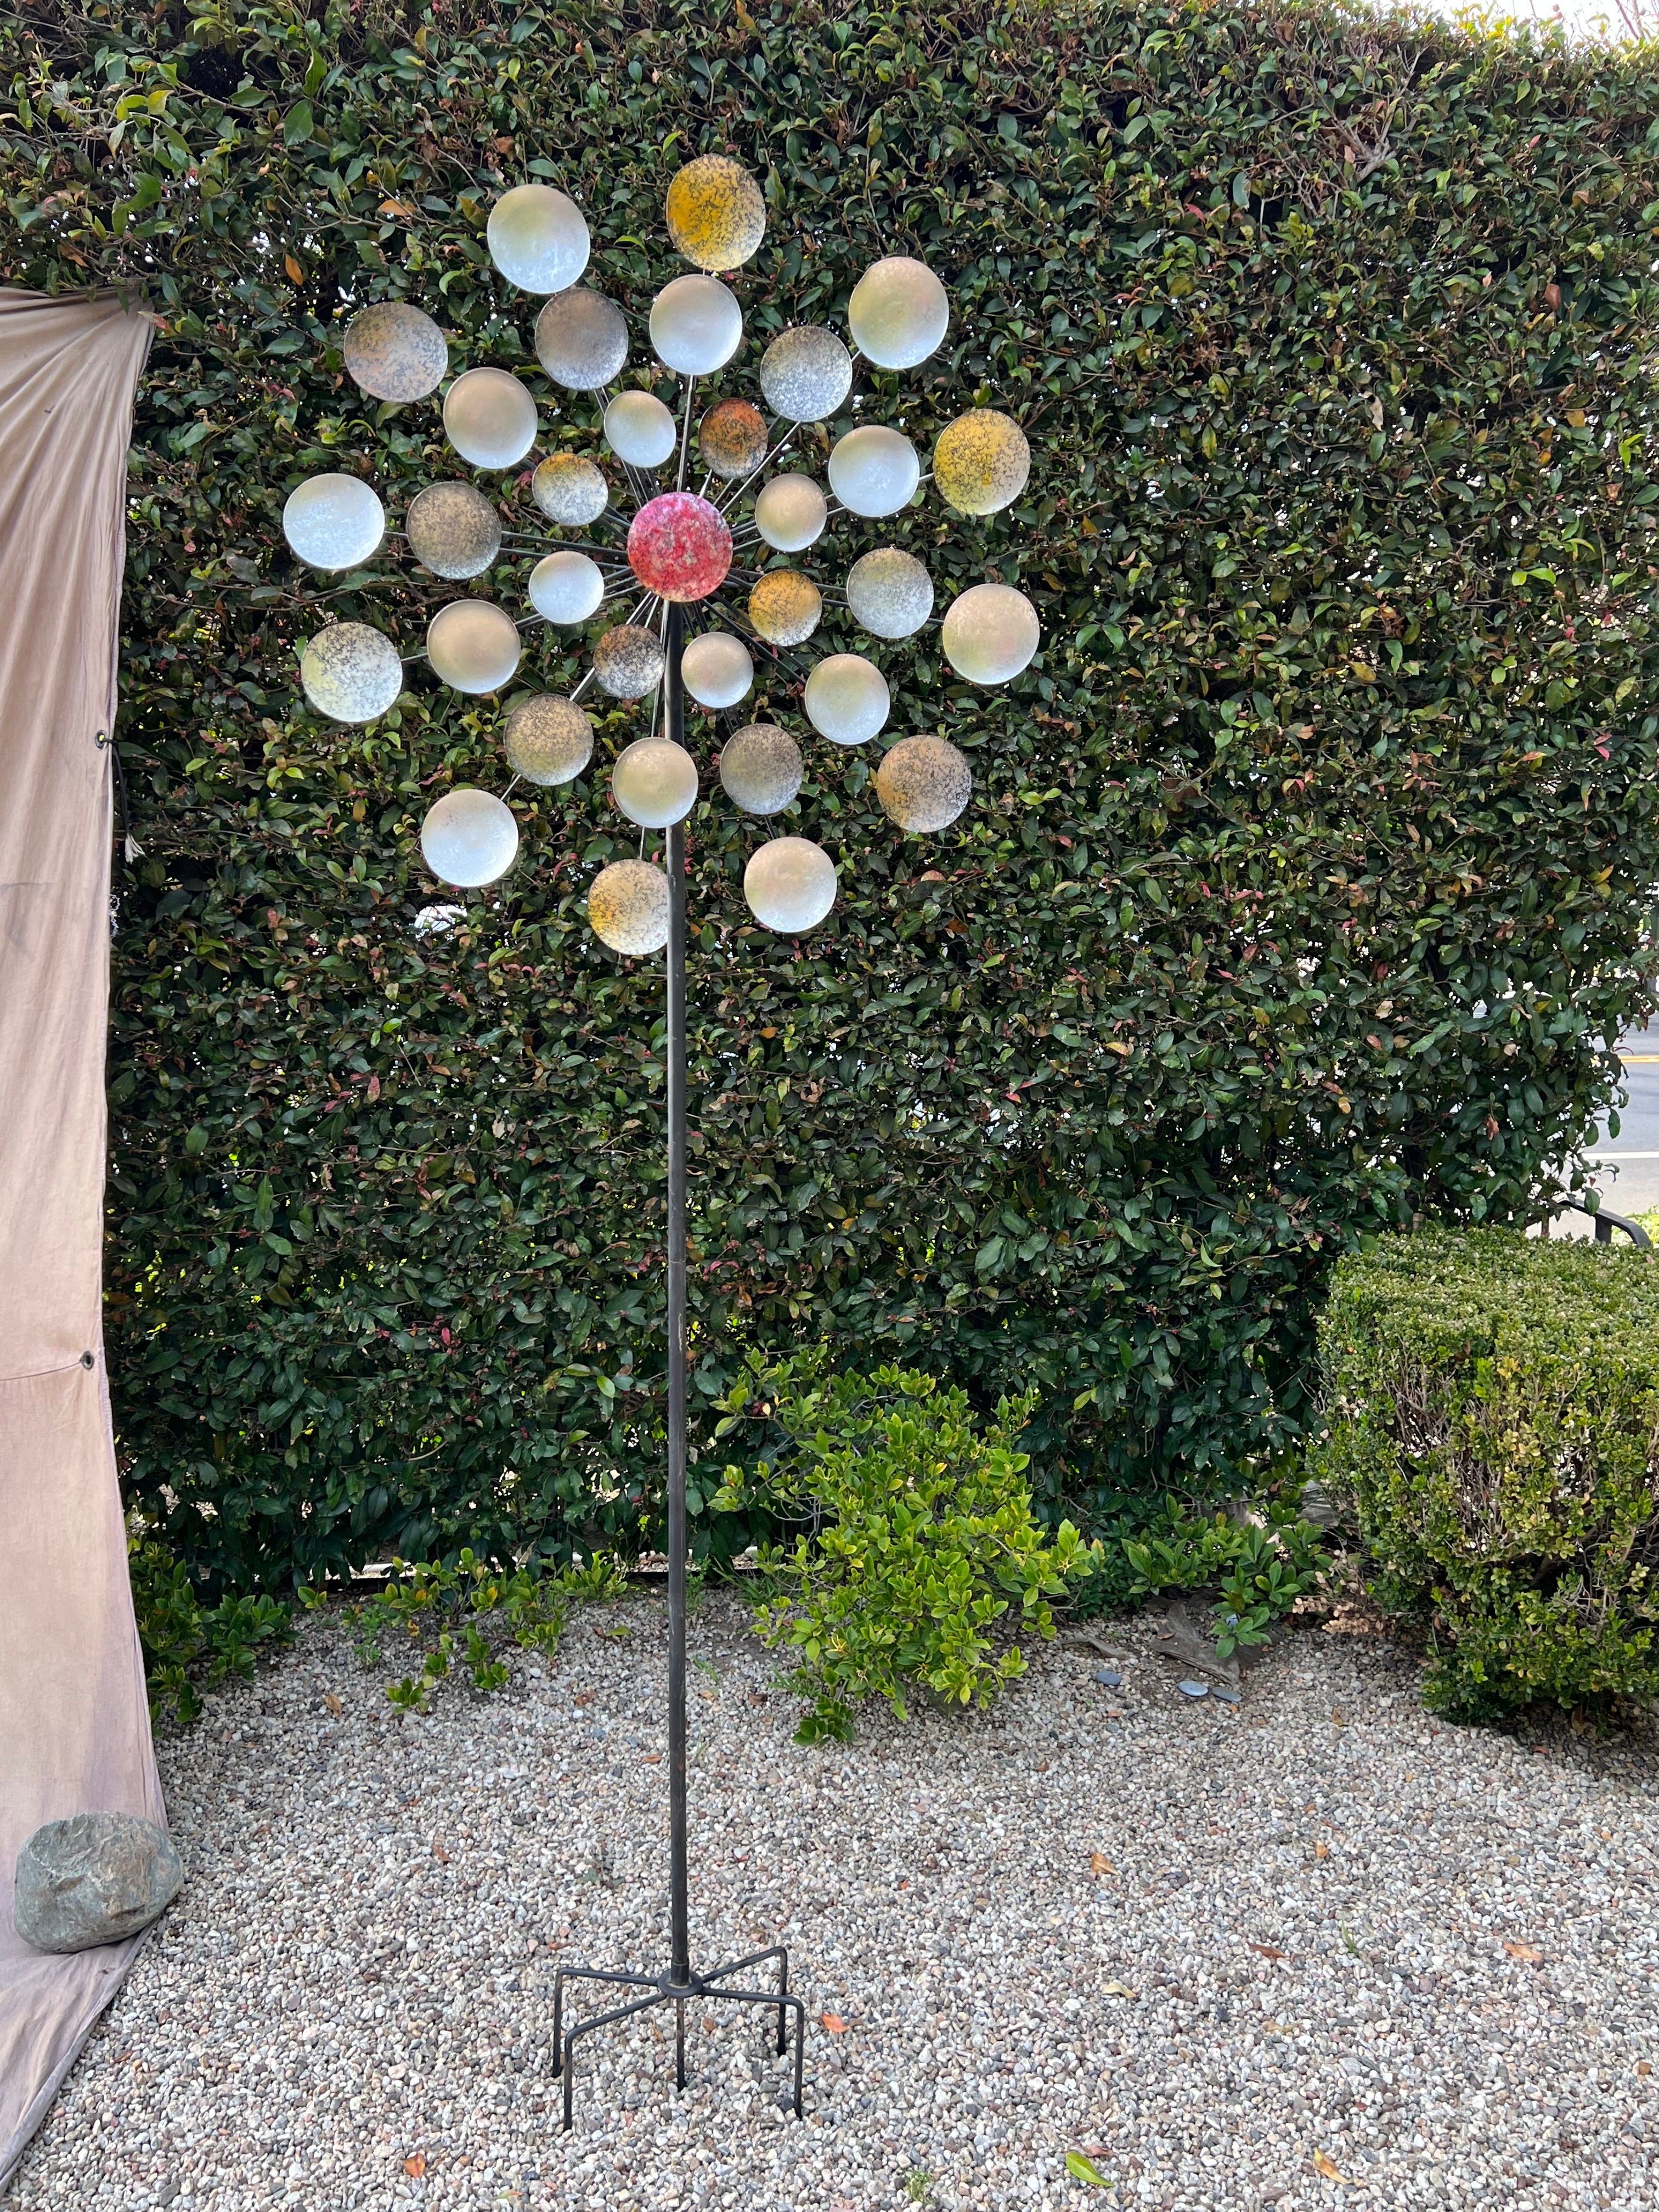 Stunning spinning garden ornament. This piece is huge - 8 feet tall - and is a calming, wise presence in any garden. The smooth spinning of the layered circles is certainly hypnotic on a breezy spring day. 

A compliment to any garden or place